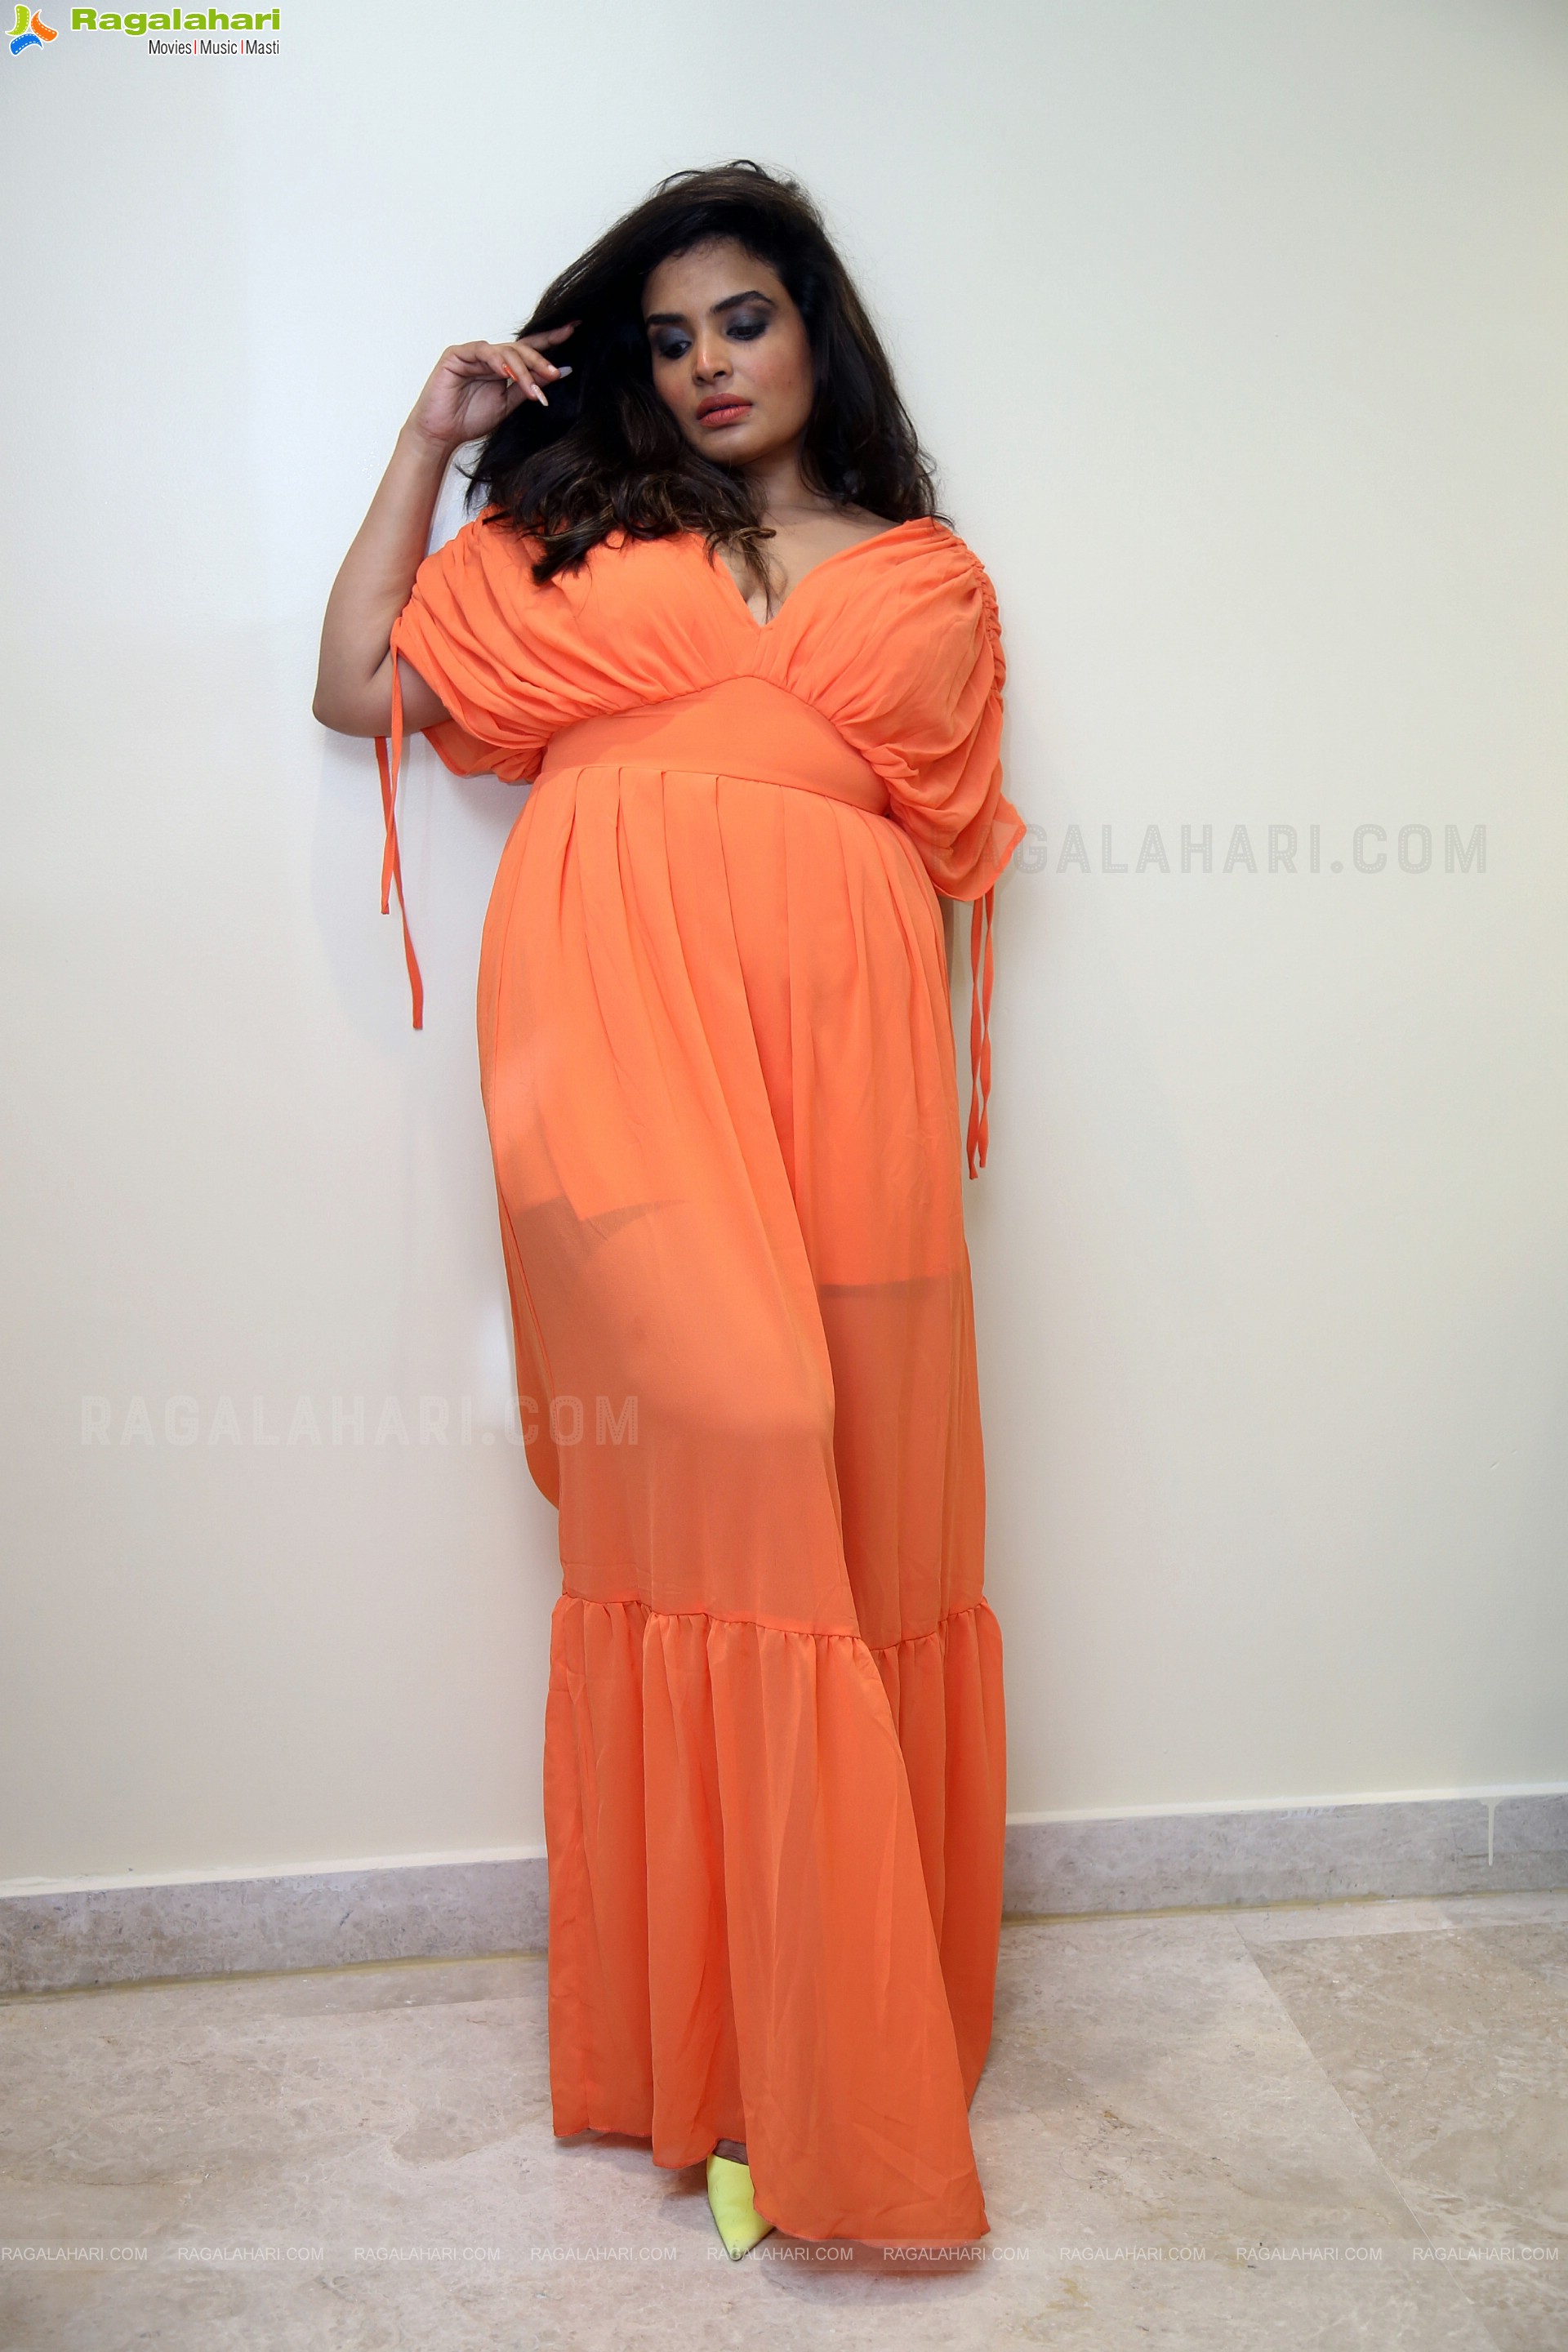 Sarayu Roy at Thaggede Le Pre-Release Event, HD Photo Gallery